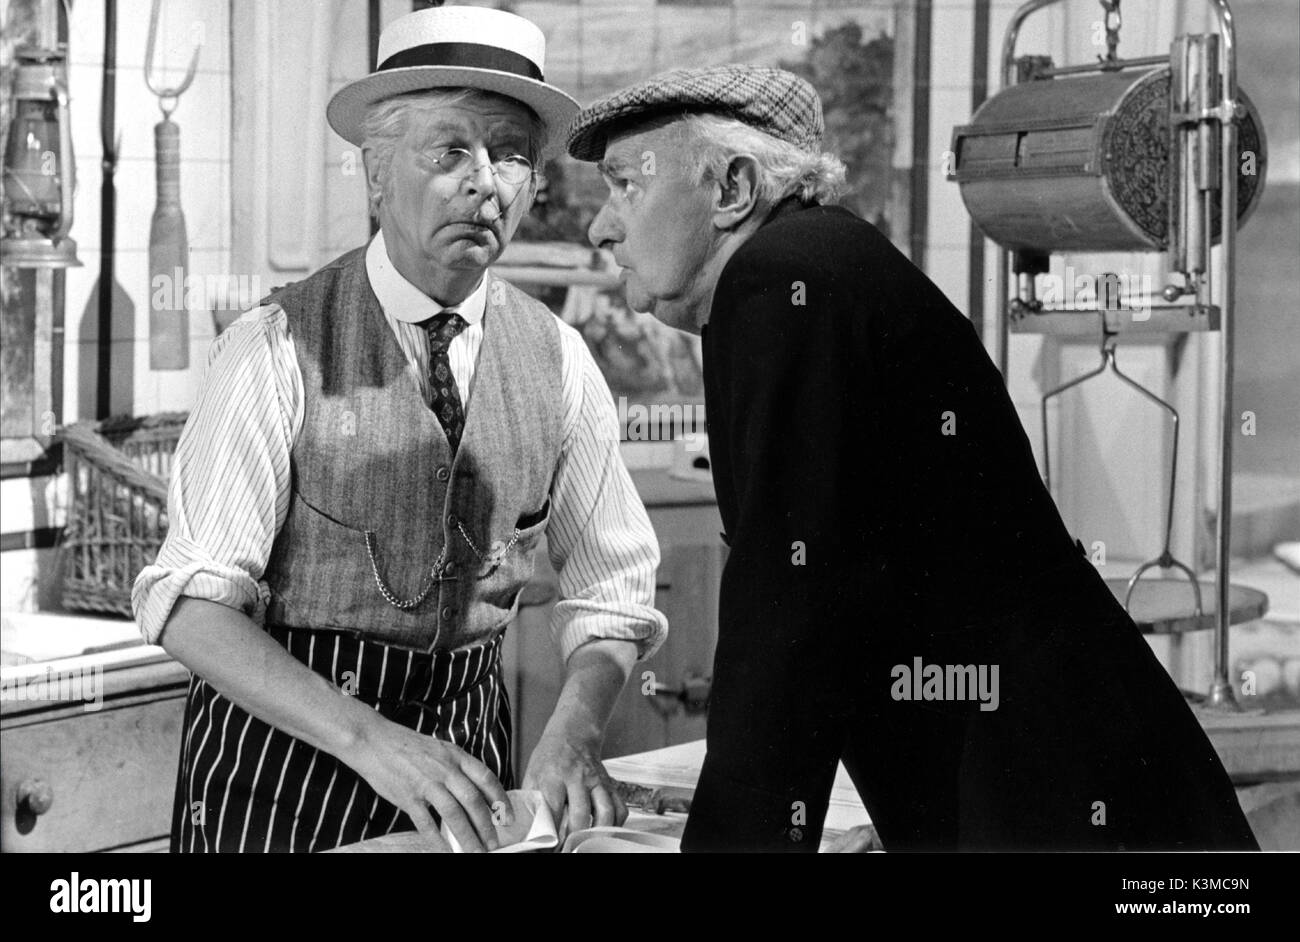 Dads army the movie Black and White Stock Photos & Images - Alamy